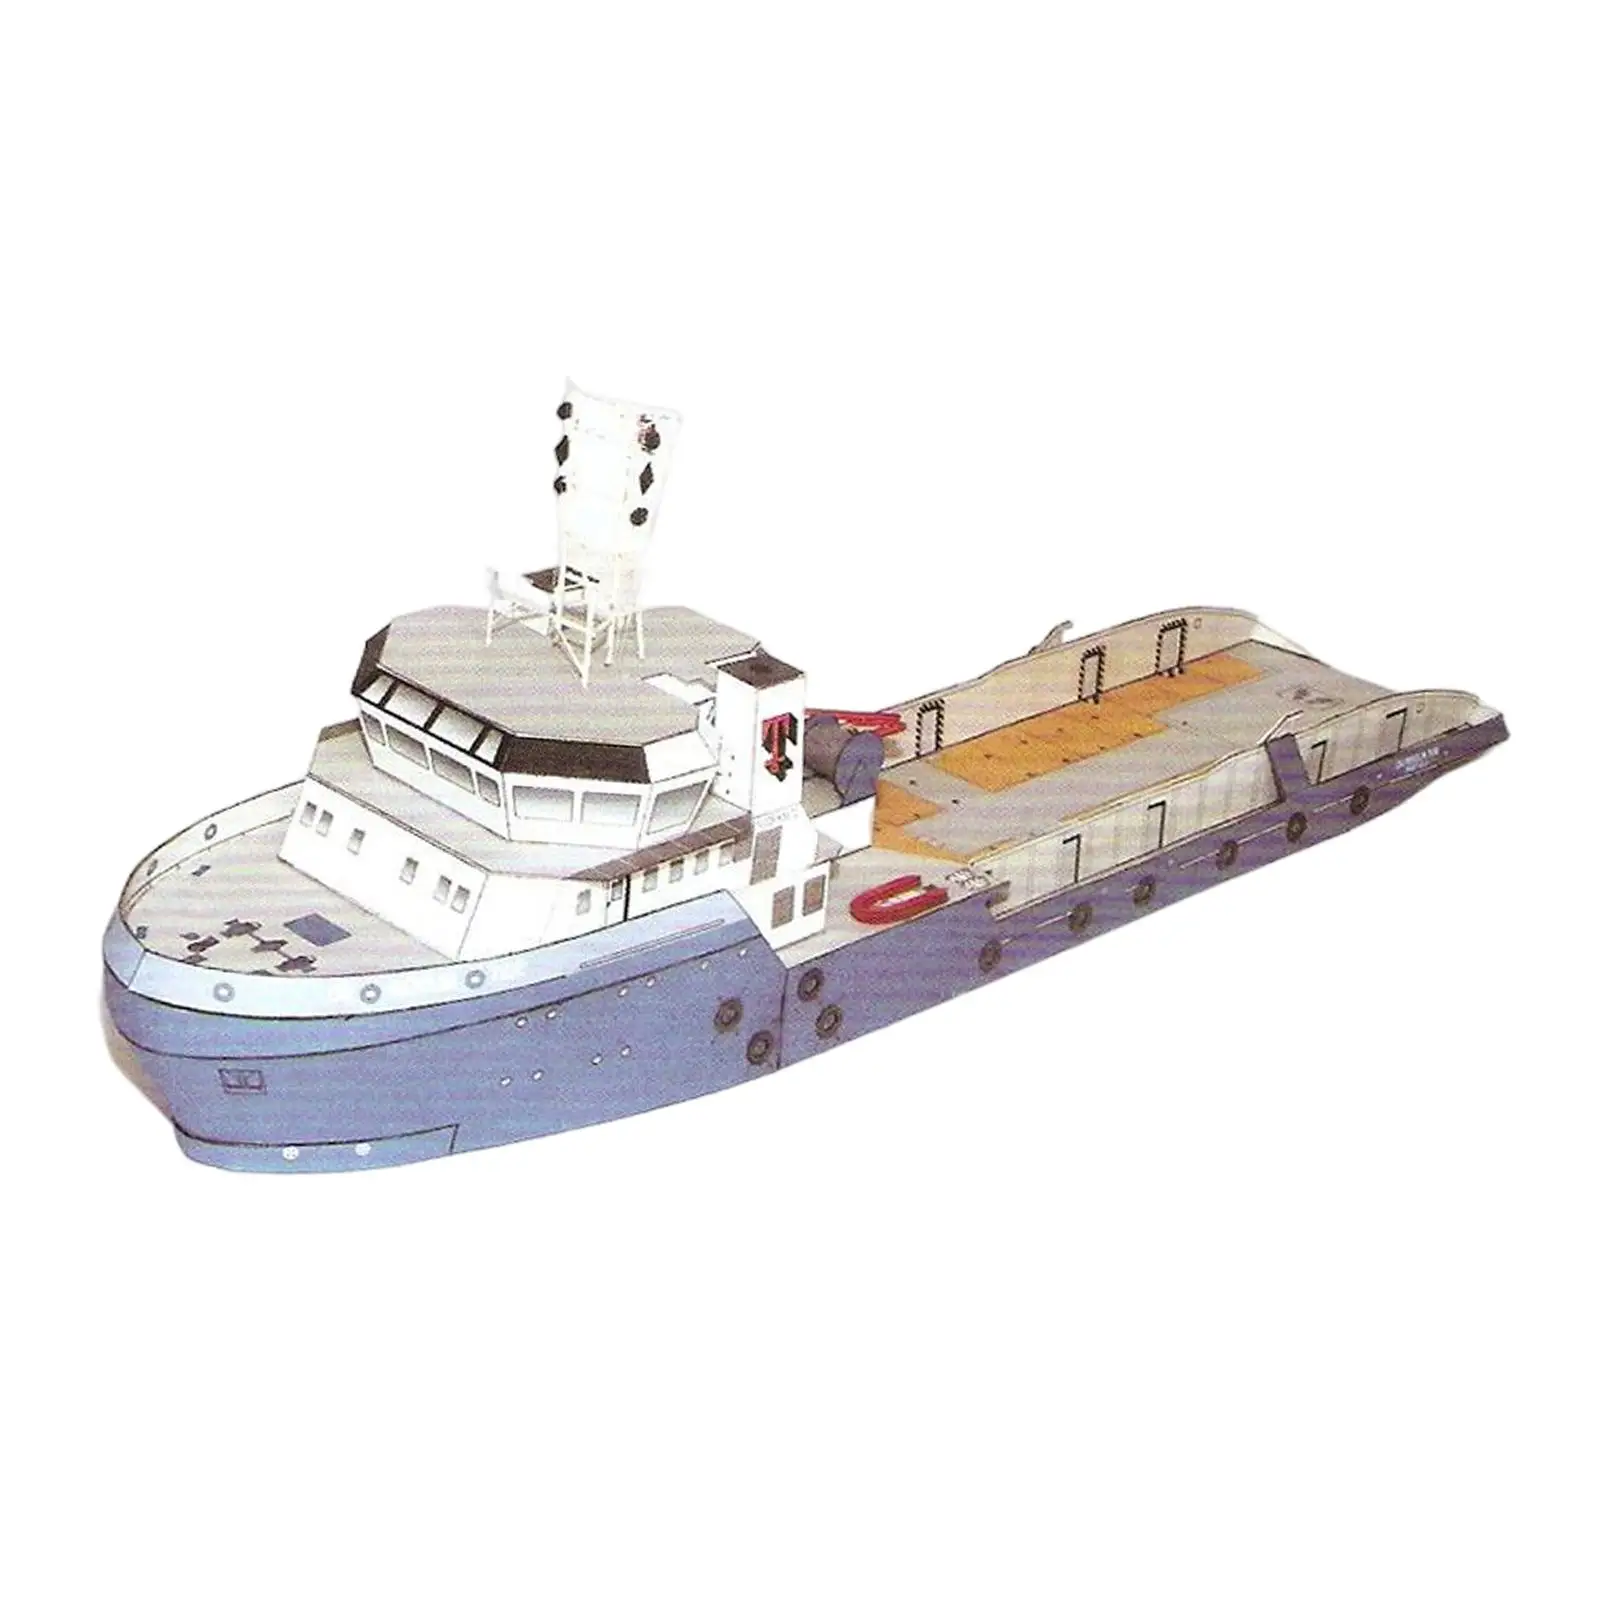 1/250 Ship Model Simulation Building Kits Decoration Boat Puzzle for Adults Kids